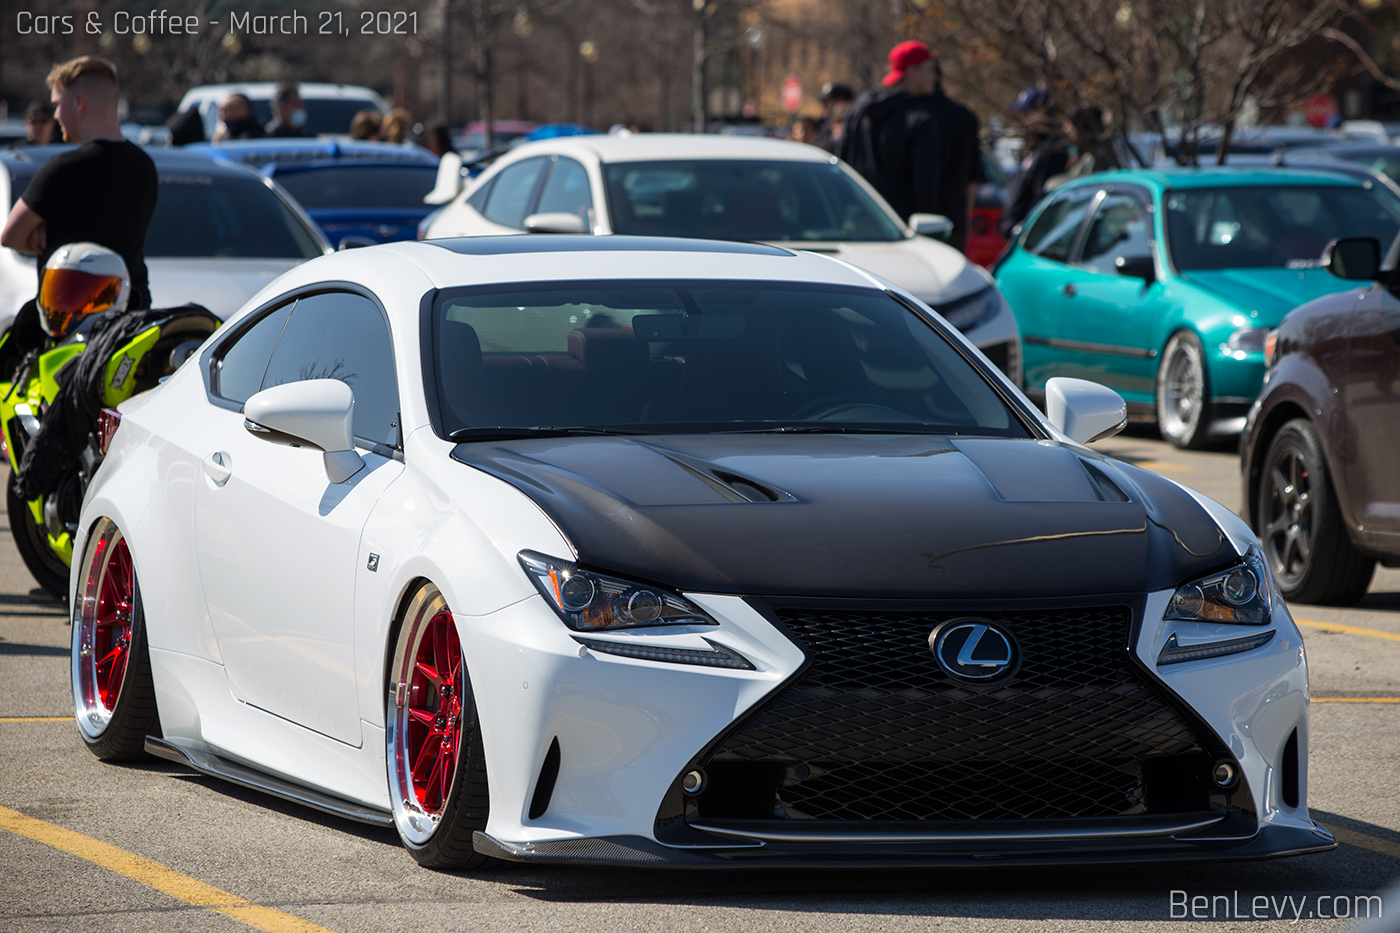 Bagged White RC350 at Car Meet in Chicago